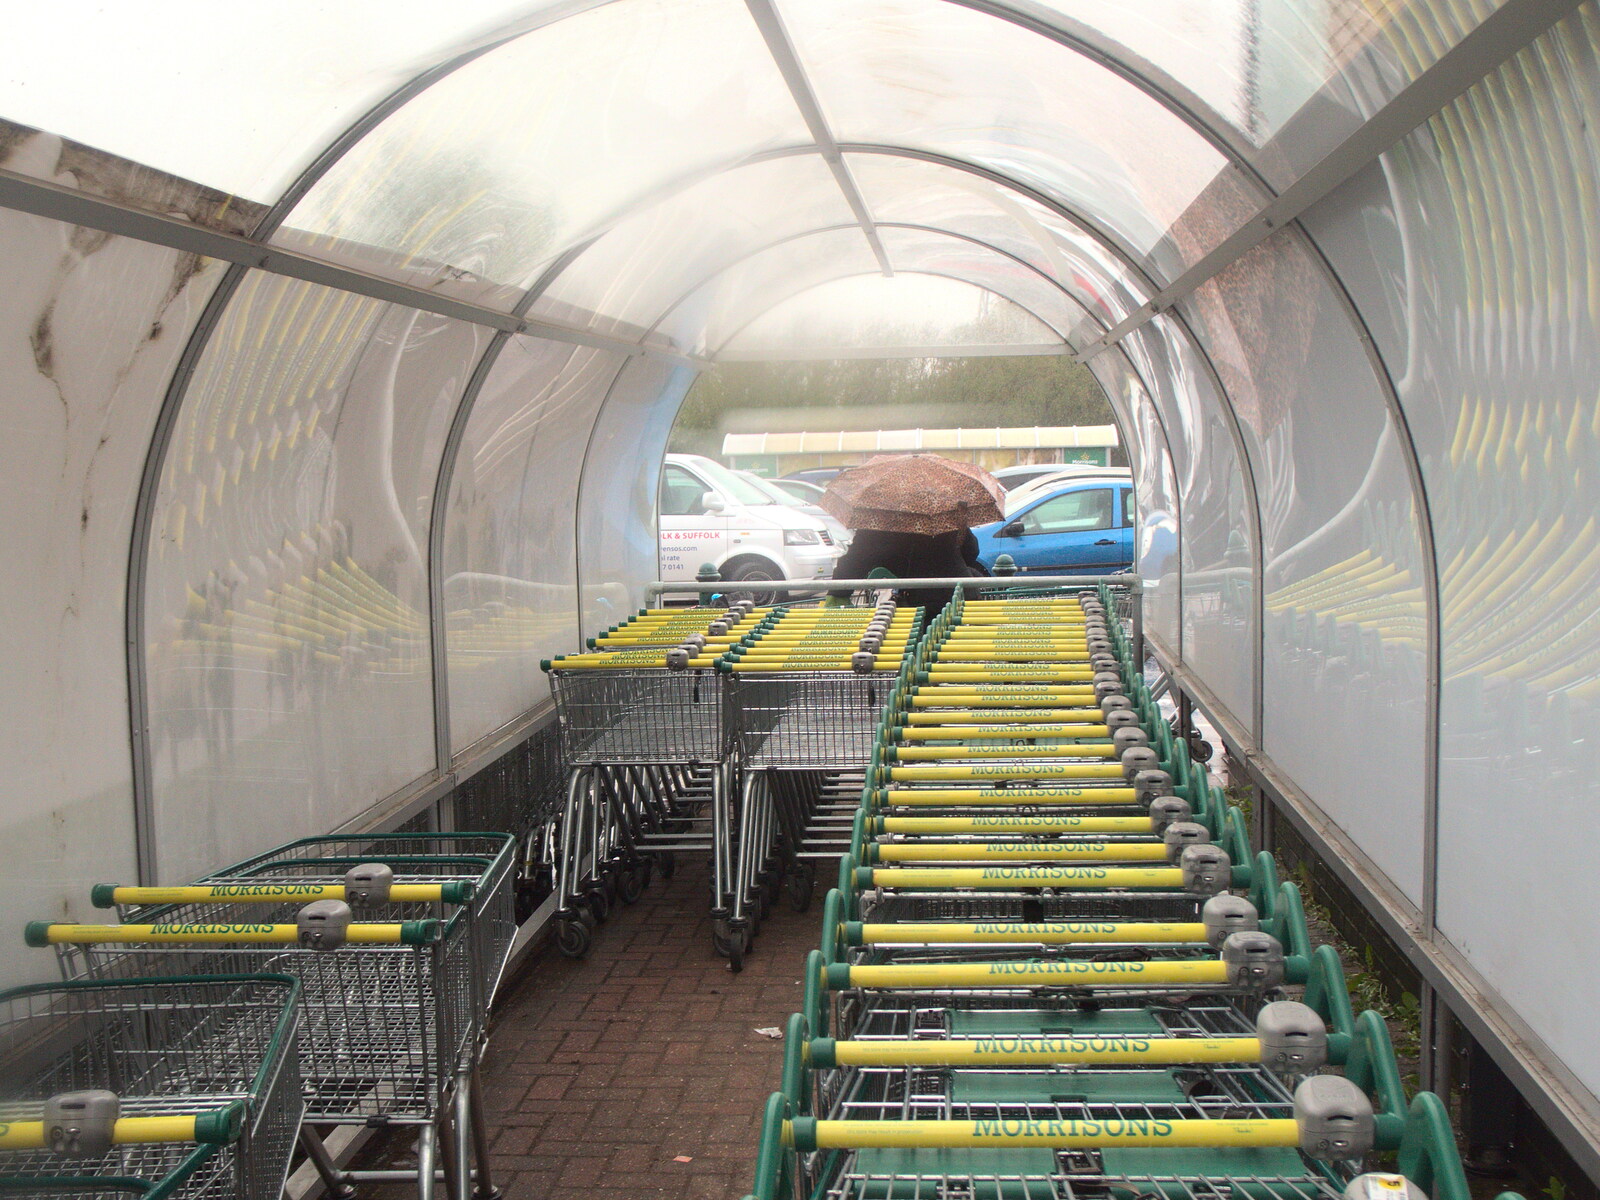 A load of trolleys in the tunnel at Morrisons from A Vaccination Afternoon, Swaffham, Norfolk - 9th May 2021